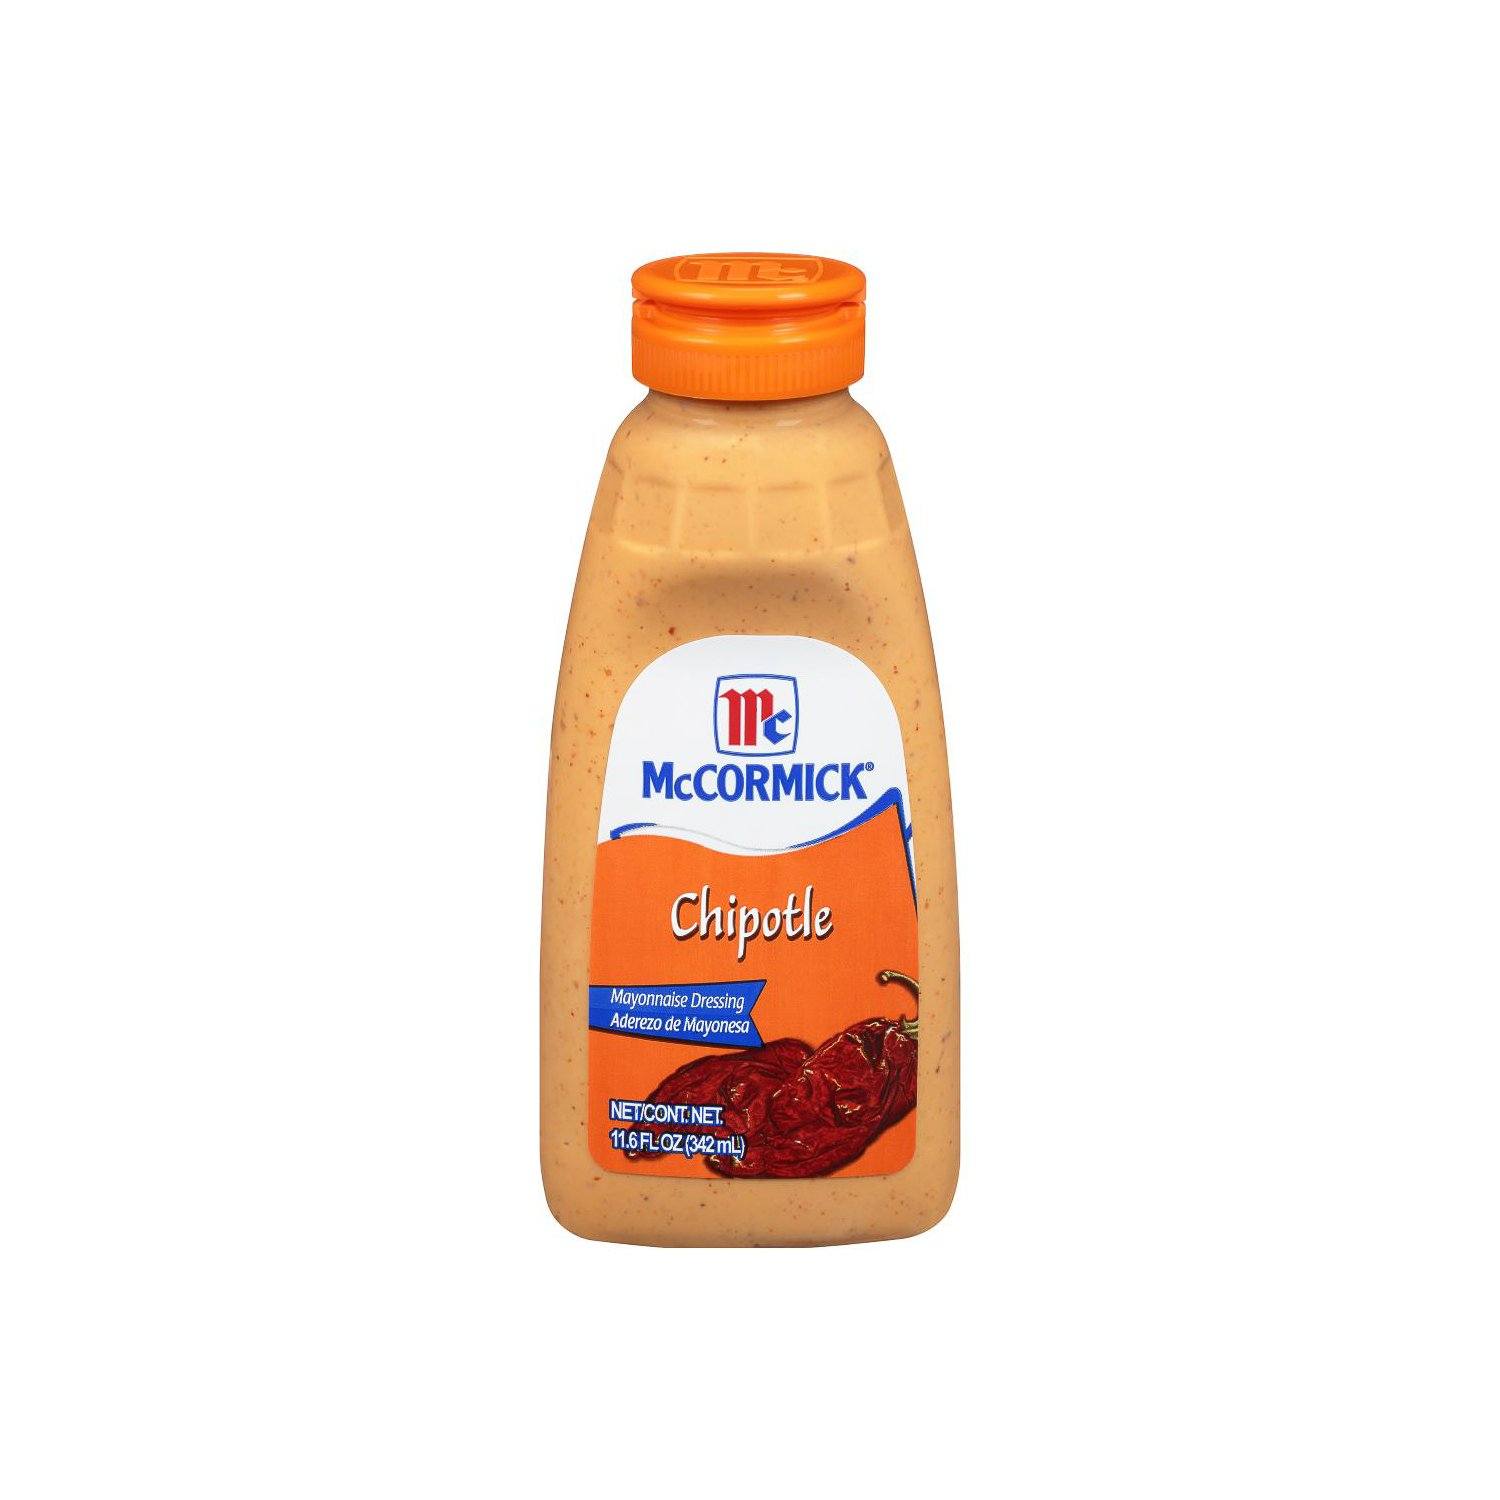 McCormick Chipotle Mayonnaise Dressing McCormick Chipotle 11.6 Fluid Ounce 